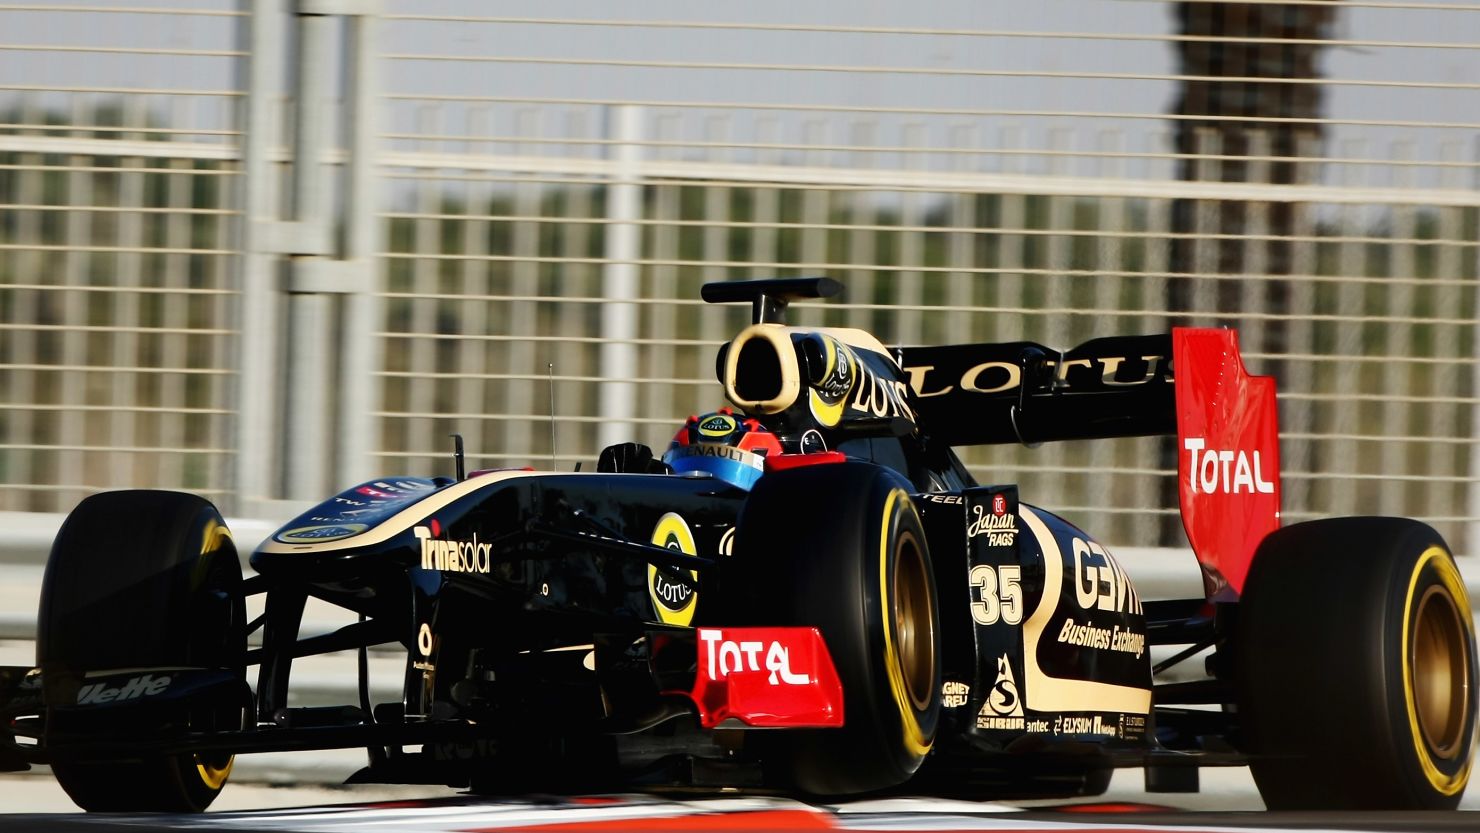 Estonia's Kevin Korjus tried out for Renault at the 2011 young drivers test, where the reactive ride-height systems were used.